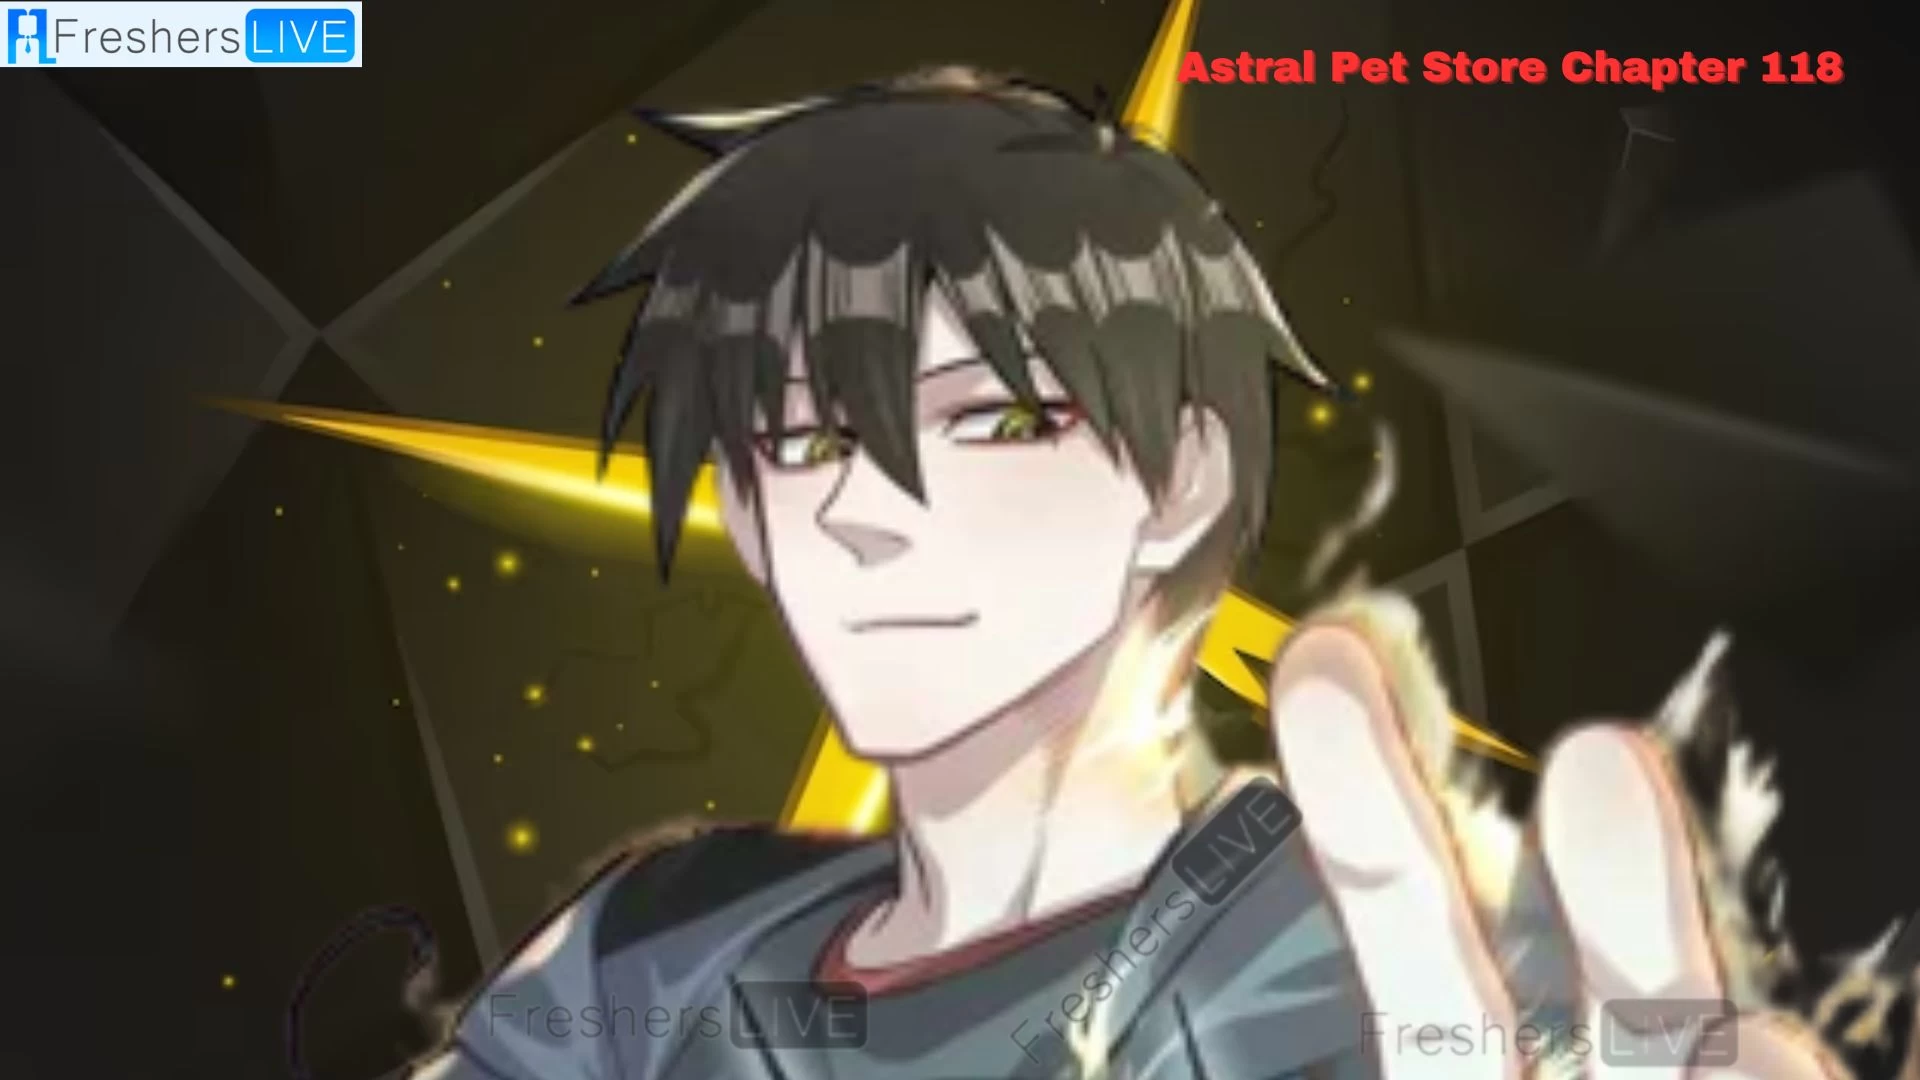 Astral Pet Store Chapter 118 Spoilers, Raw Scan, Release Date, Countdown and Where to Read Astral Pet Store Chapter 118?